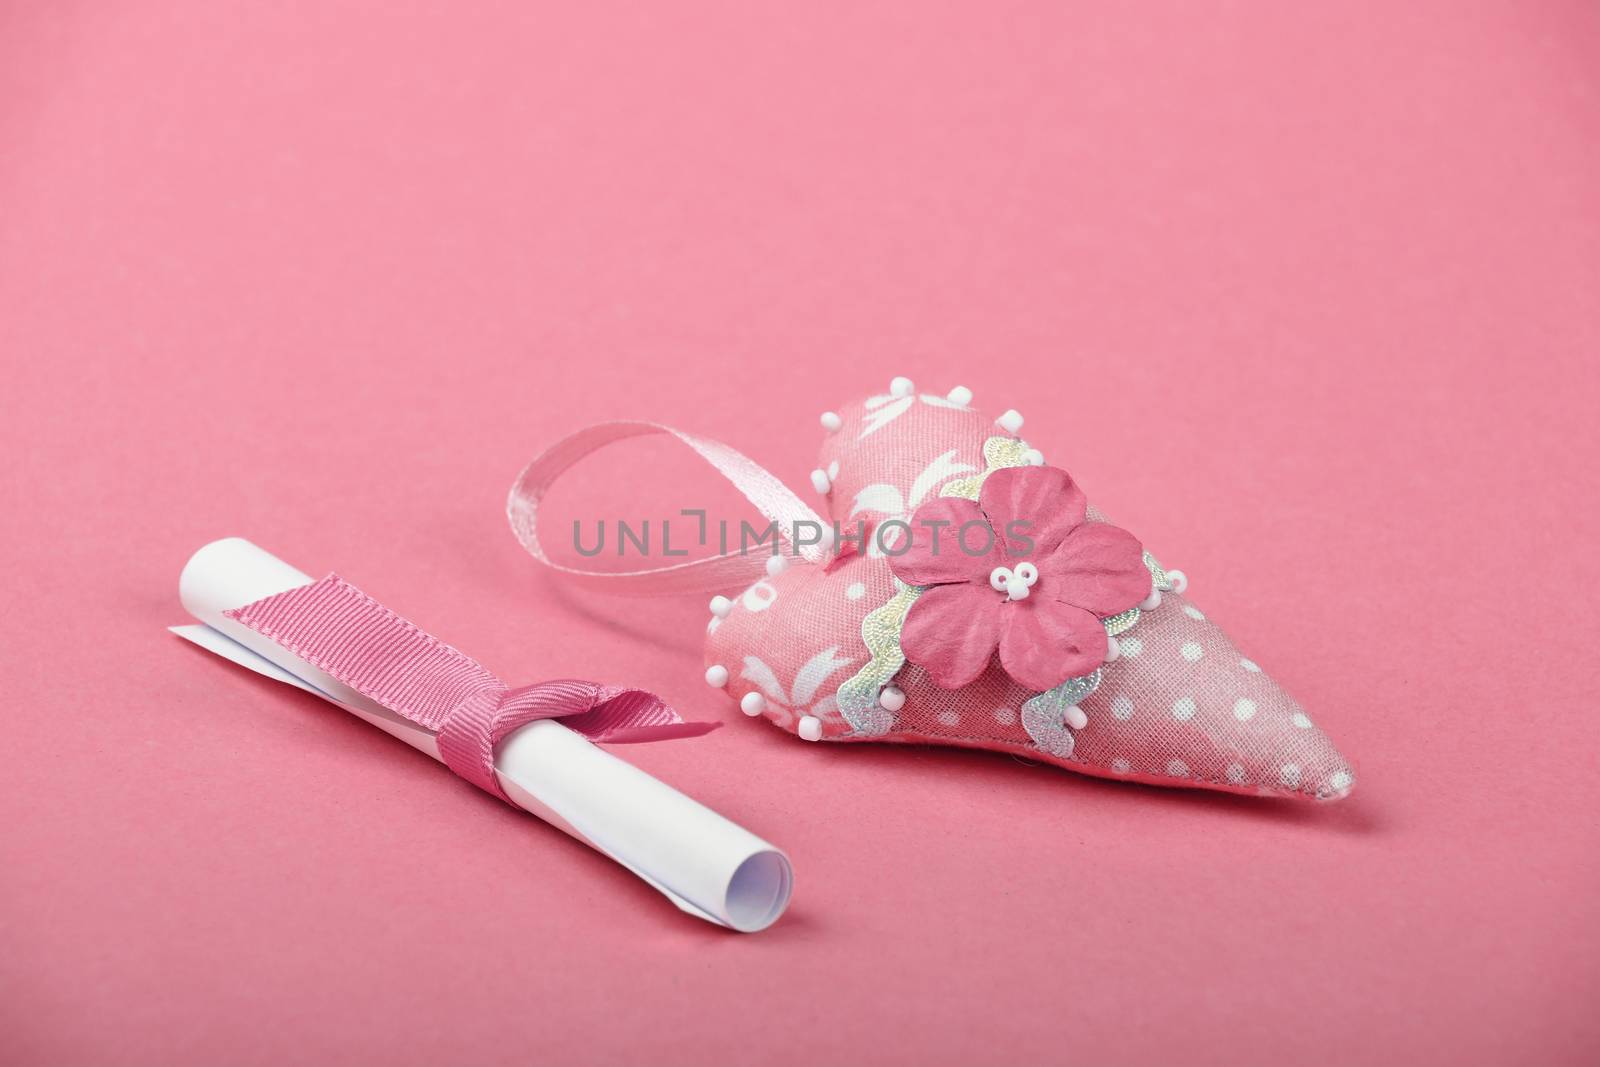 One small white paper scroll love message note with ribbon and heart with flower on rose pink background